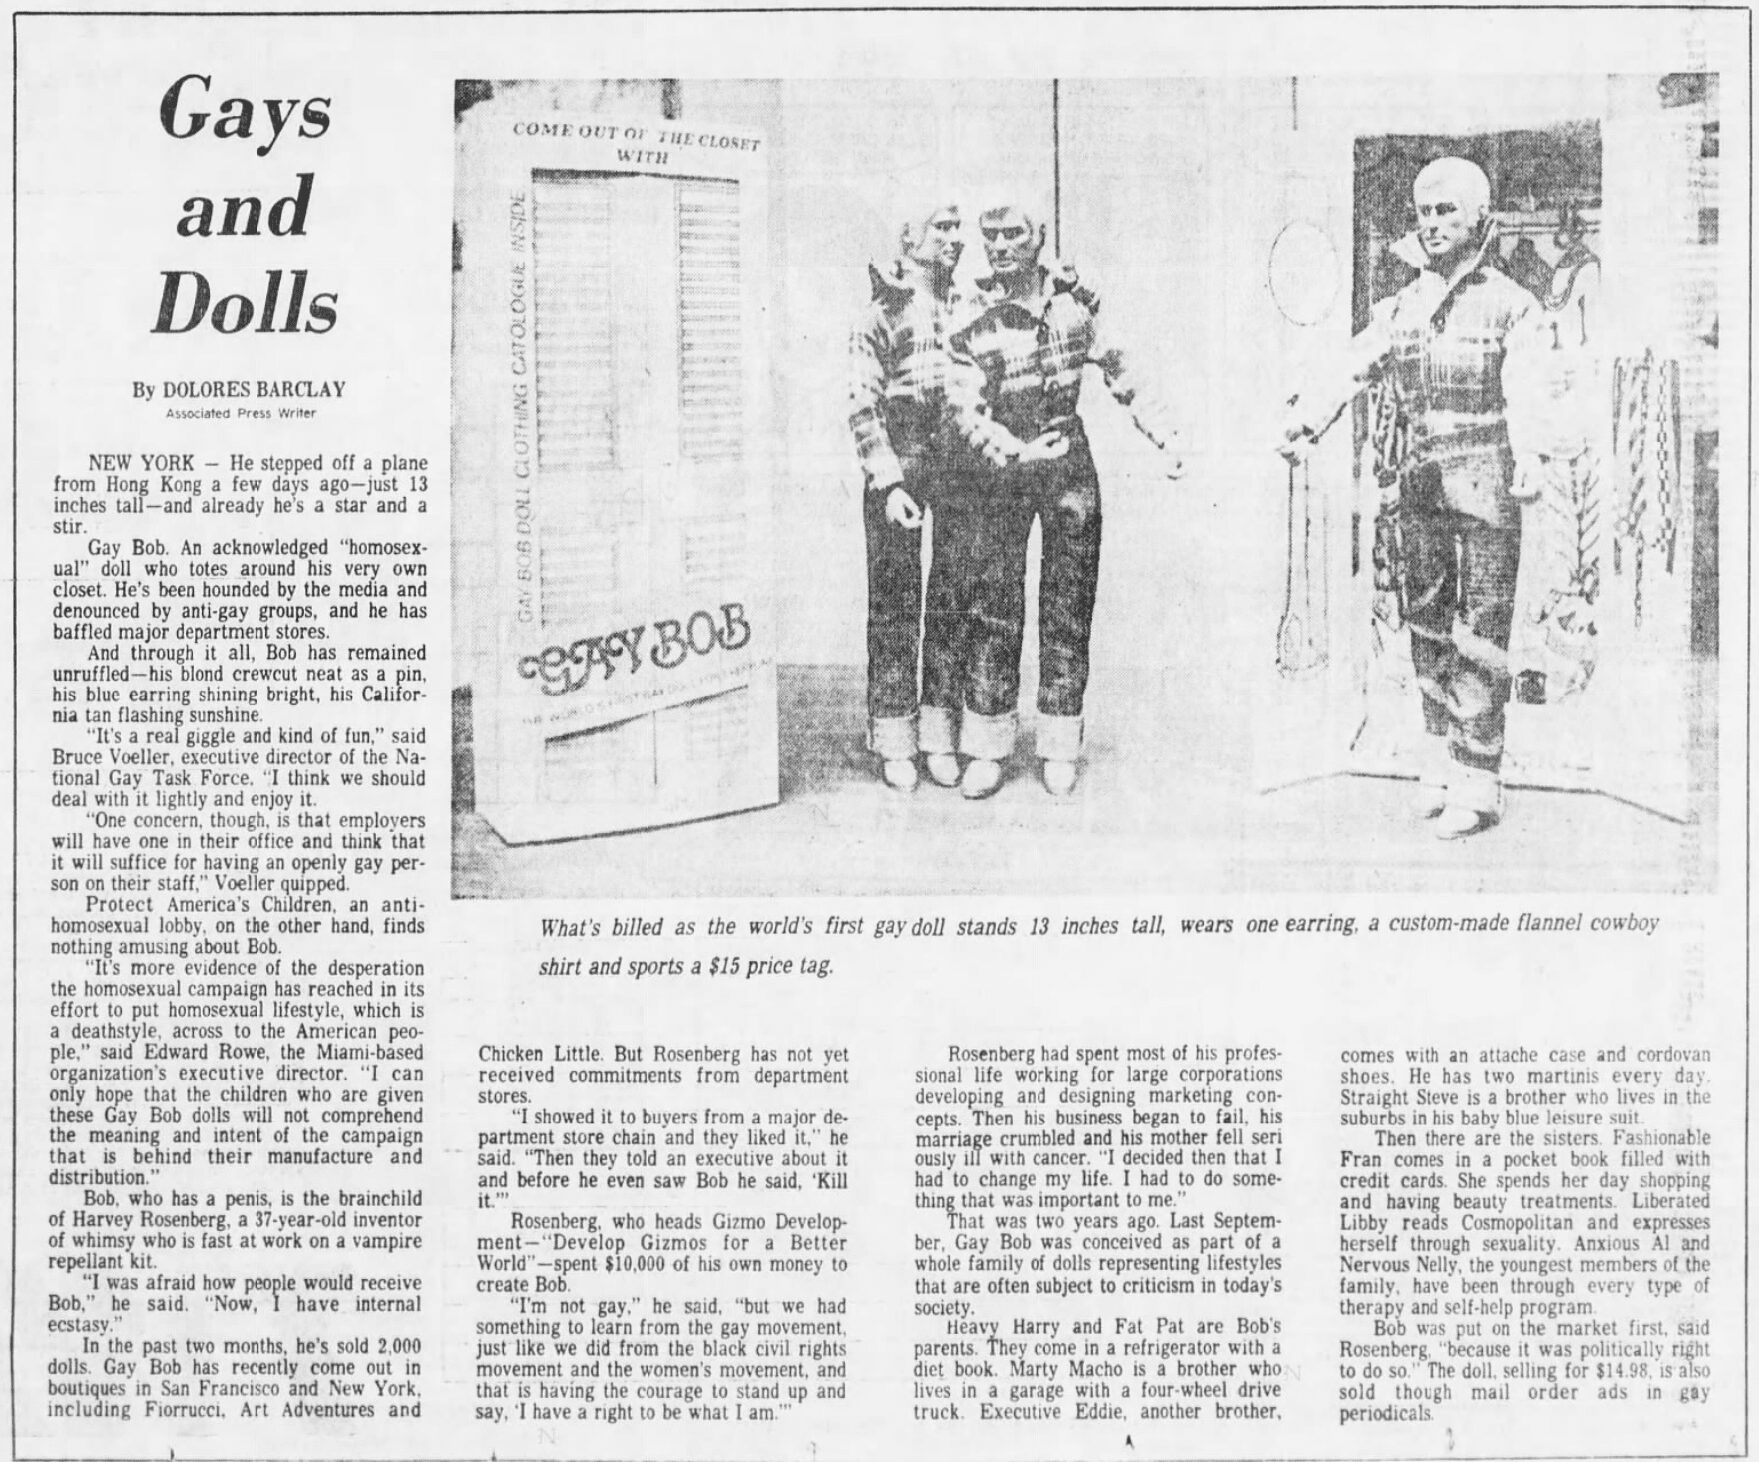 "Gays and Dolls", a piece about the Gay Bob Doll. Pittsburgh Post-Gazette, 9 August 1978, Wednesday, p. 45.